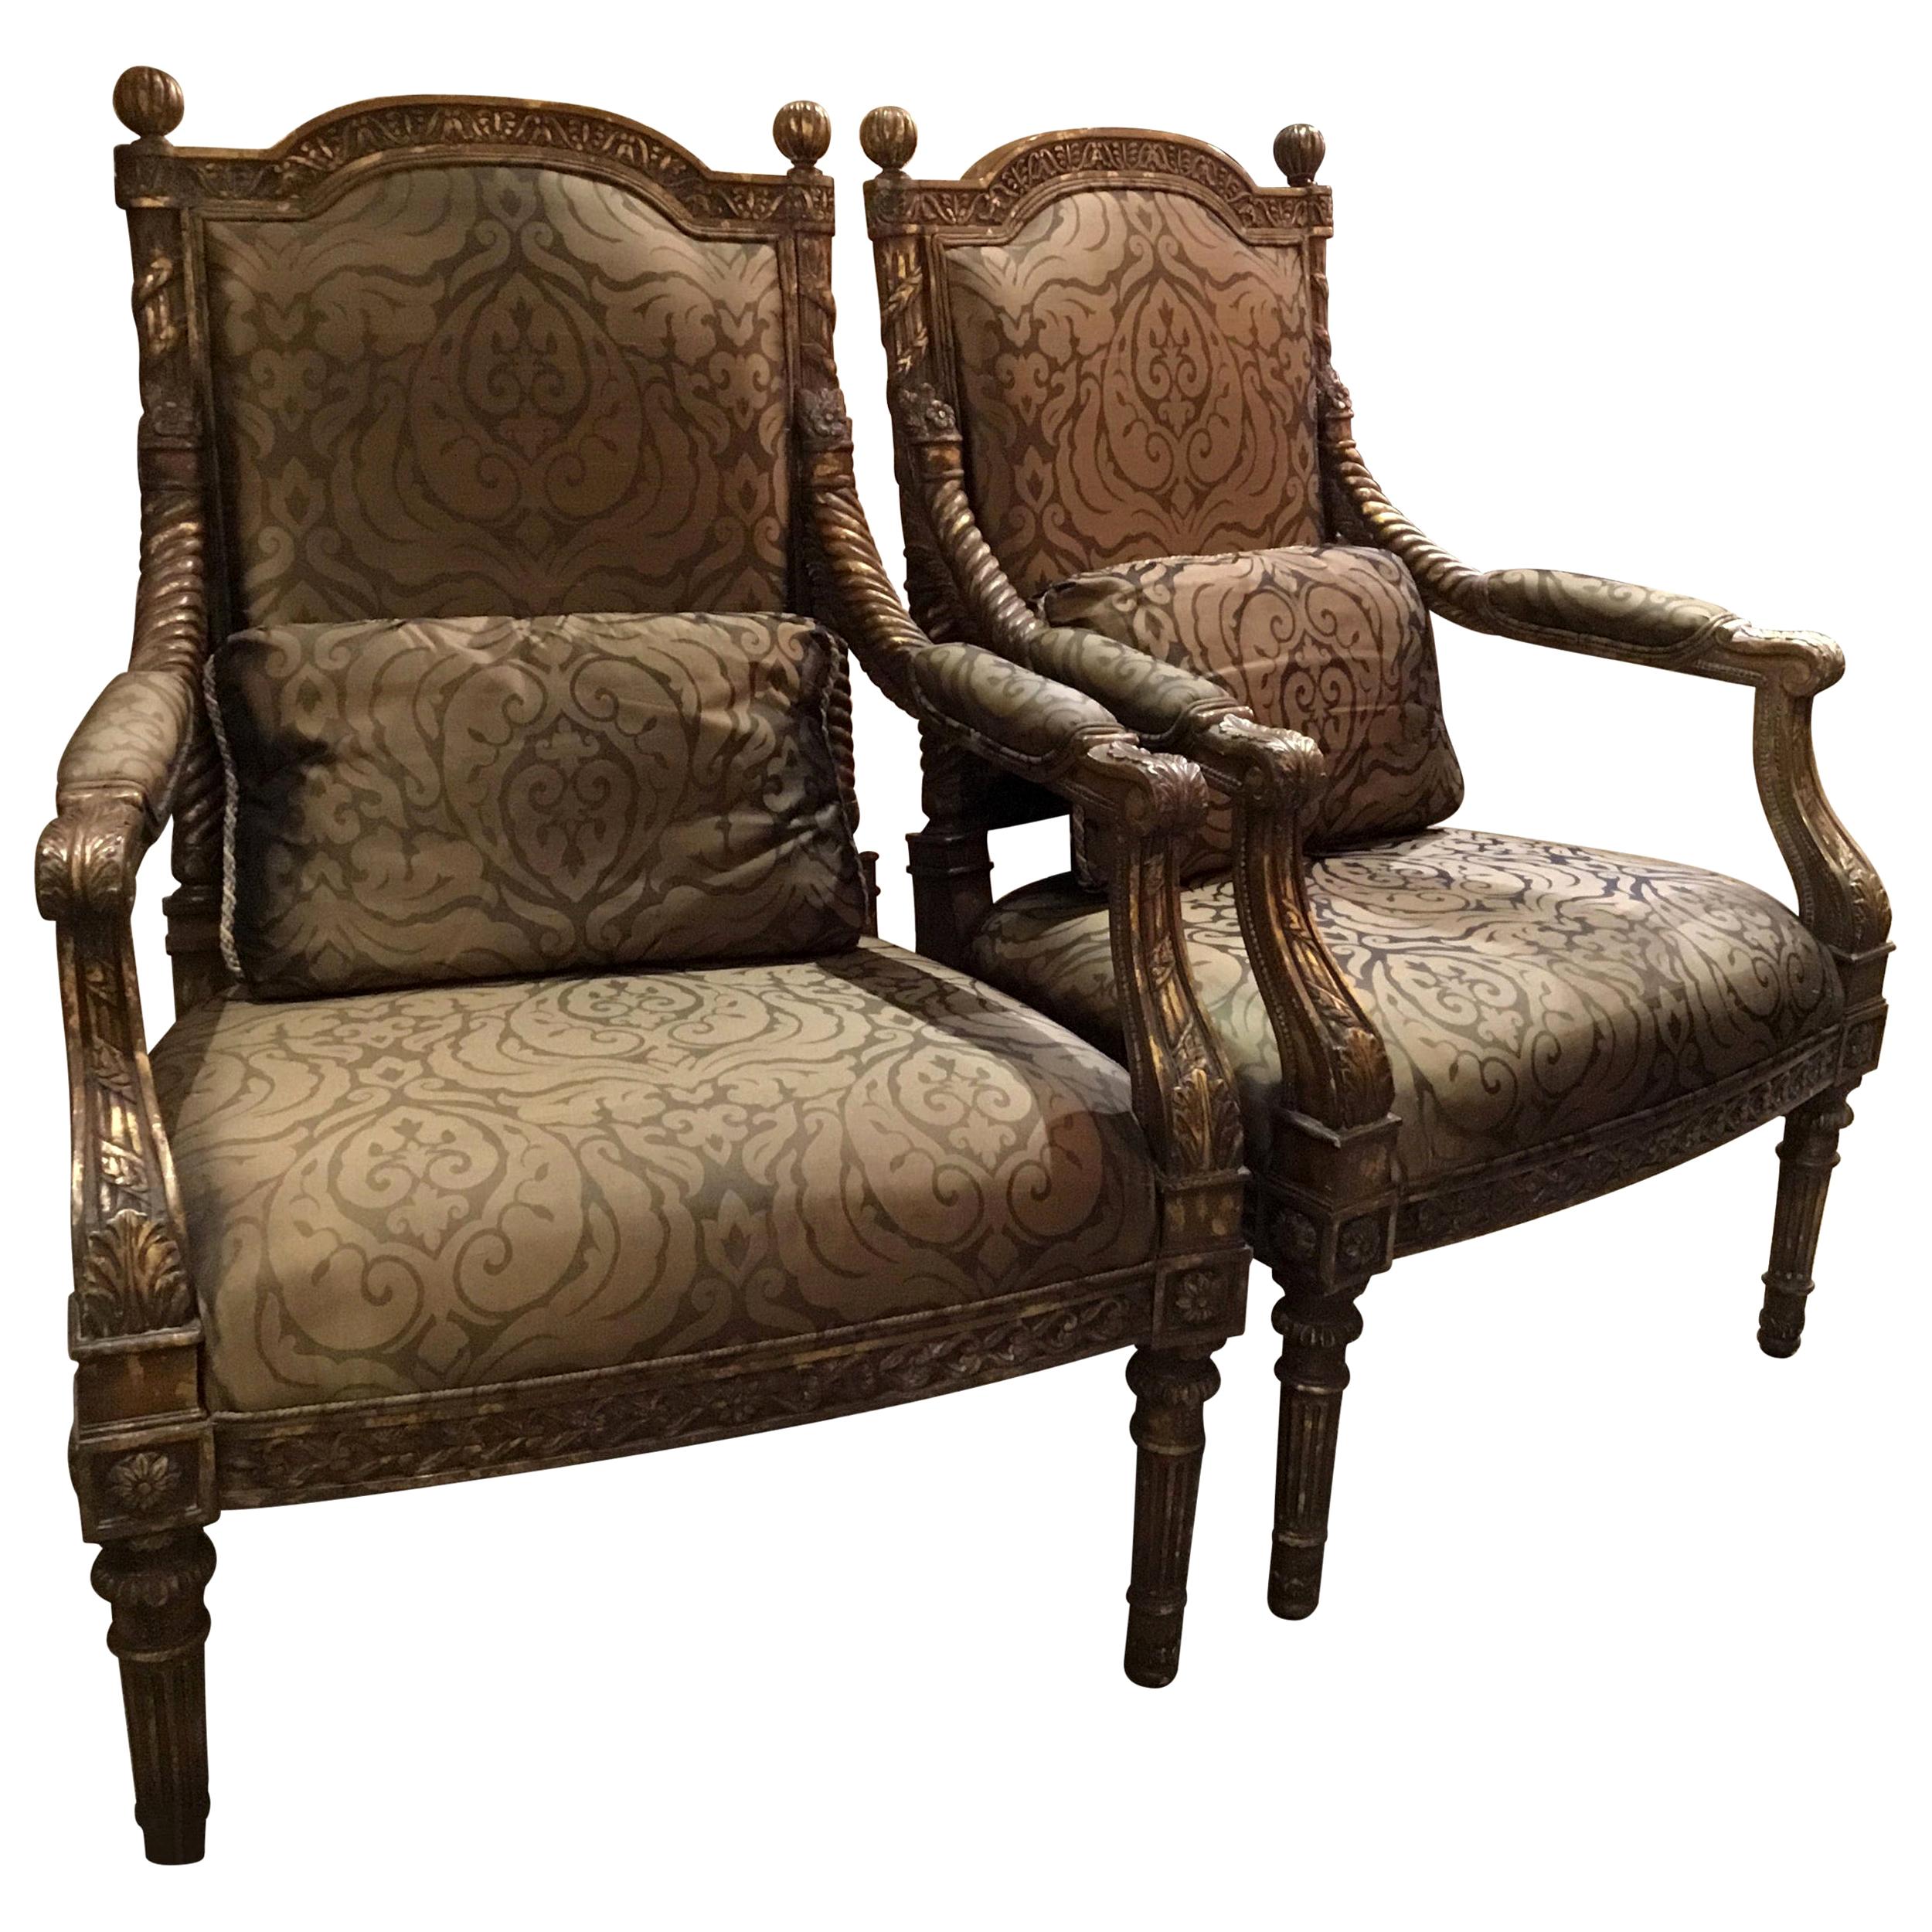 Pair of Louis XVI Style Chairs with Silk Upholstery For Sale